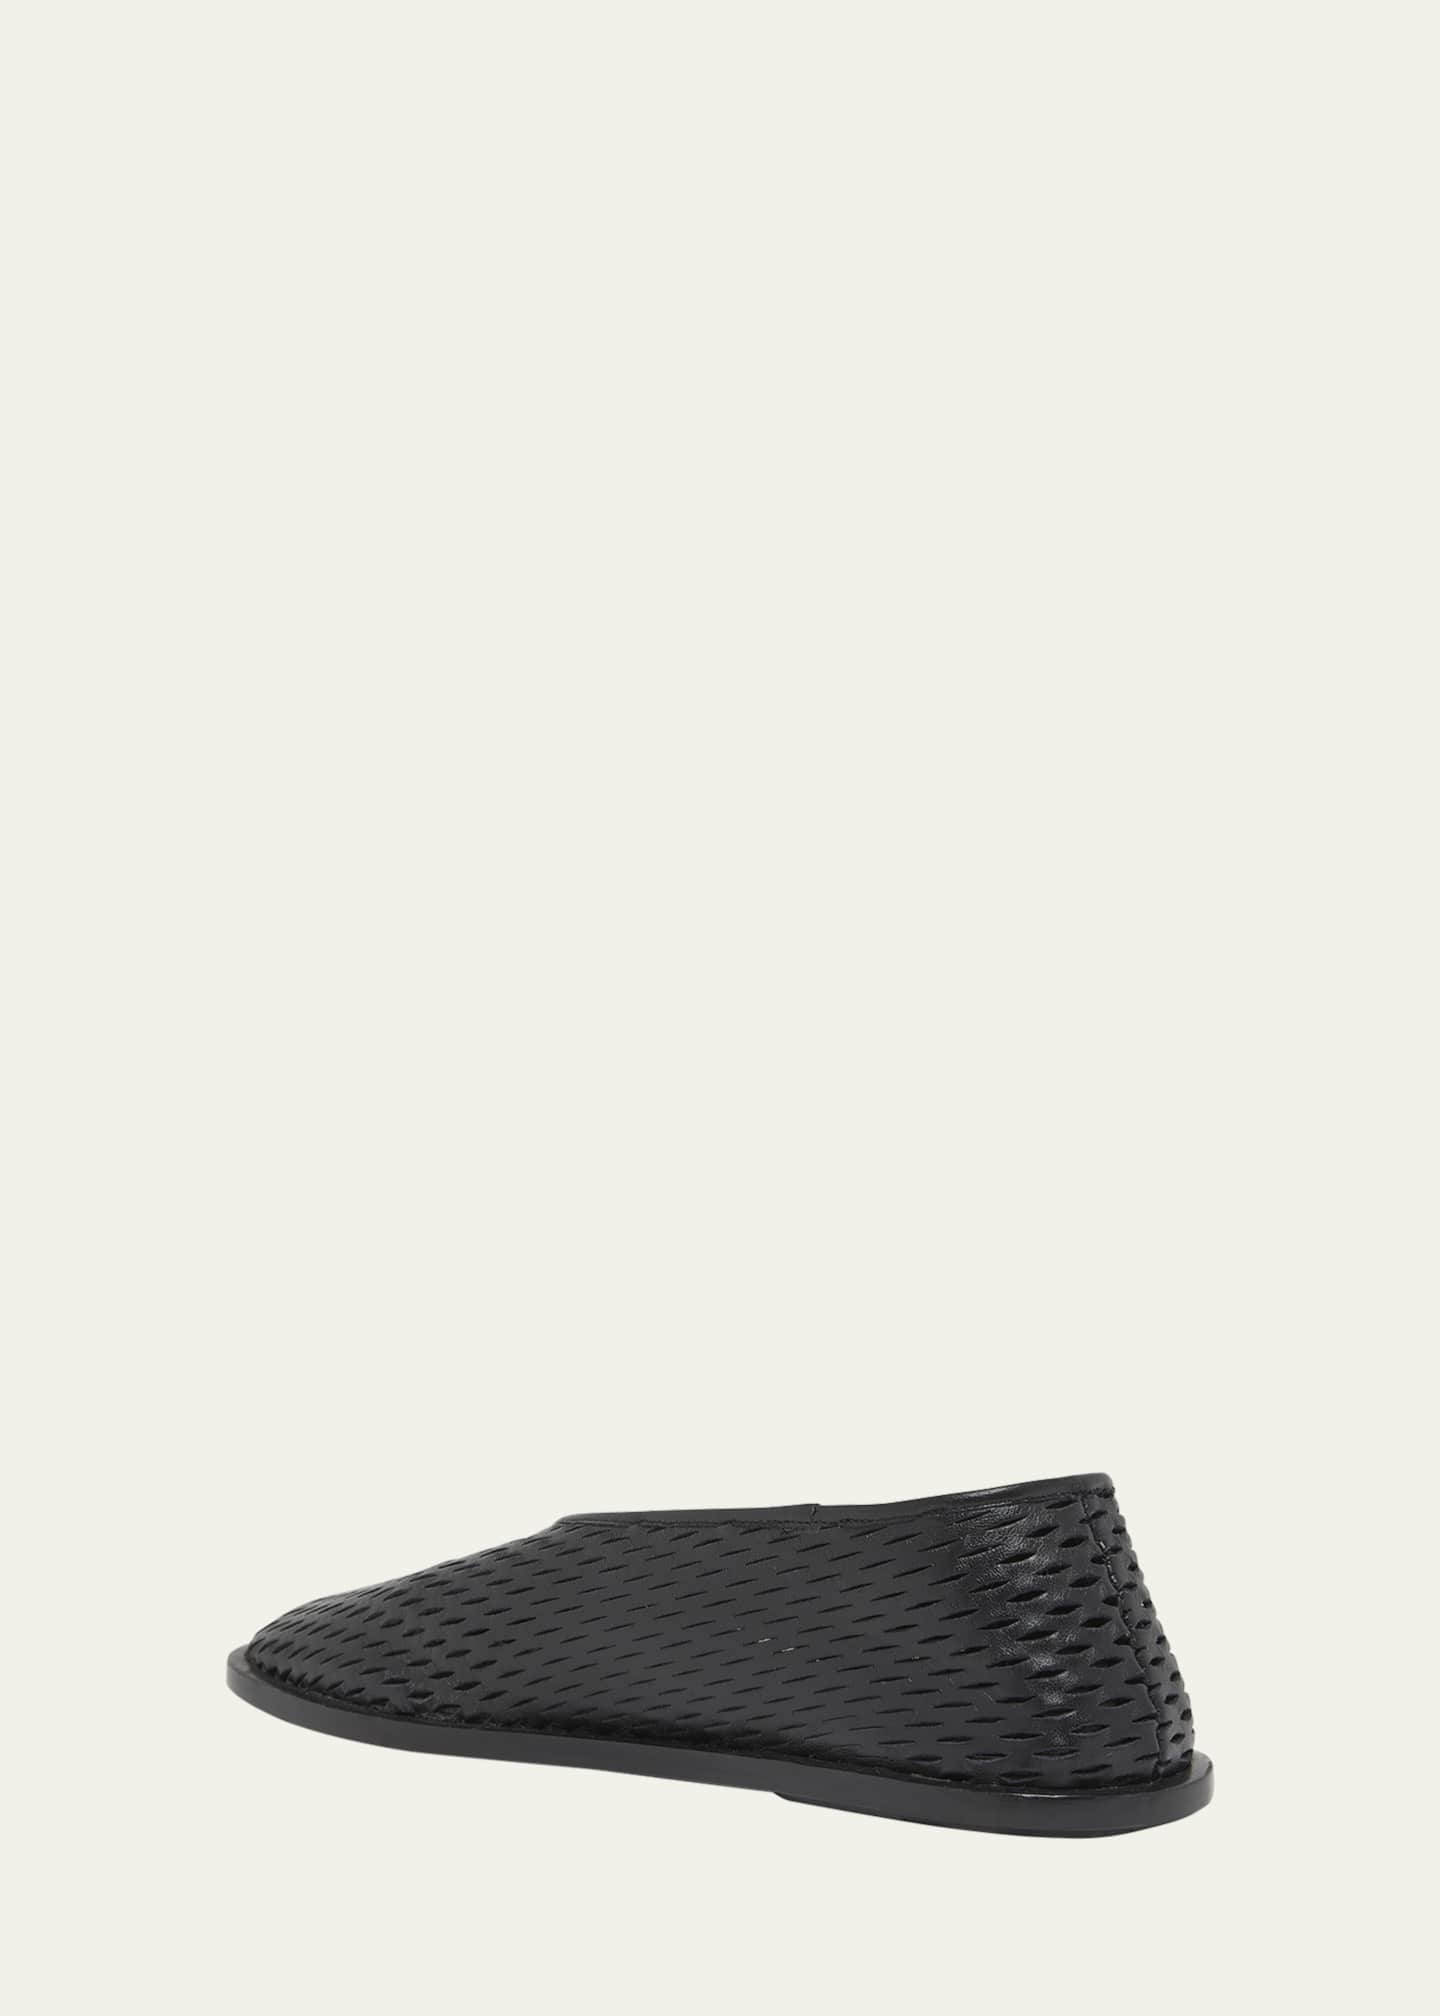 Proenza Schouler Perforated Leather Square-Toe Ballerina Flats ...